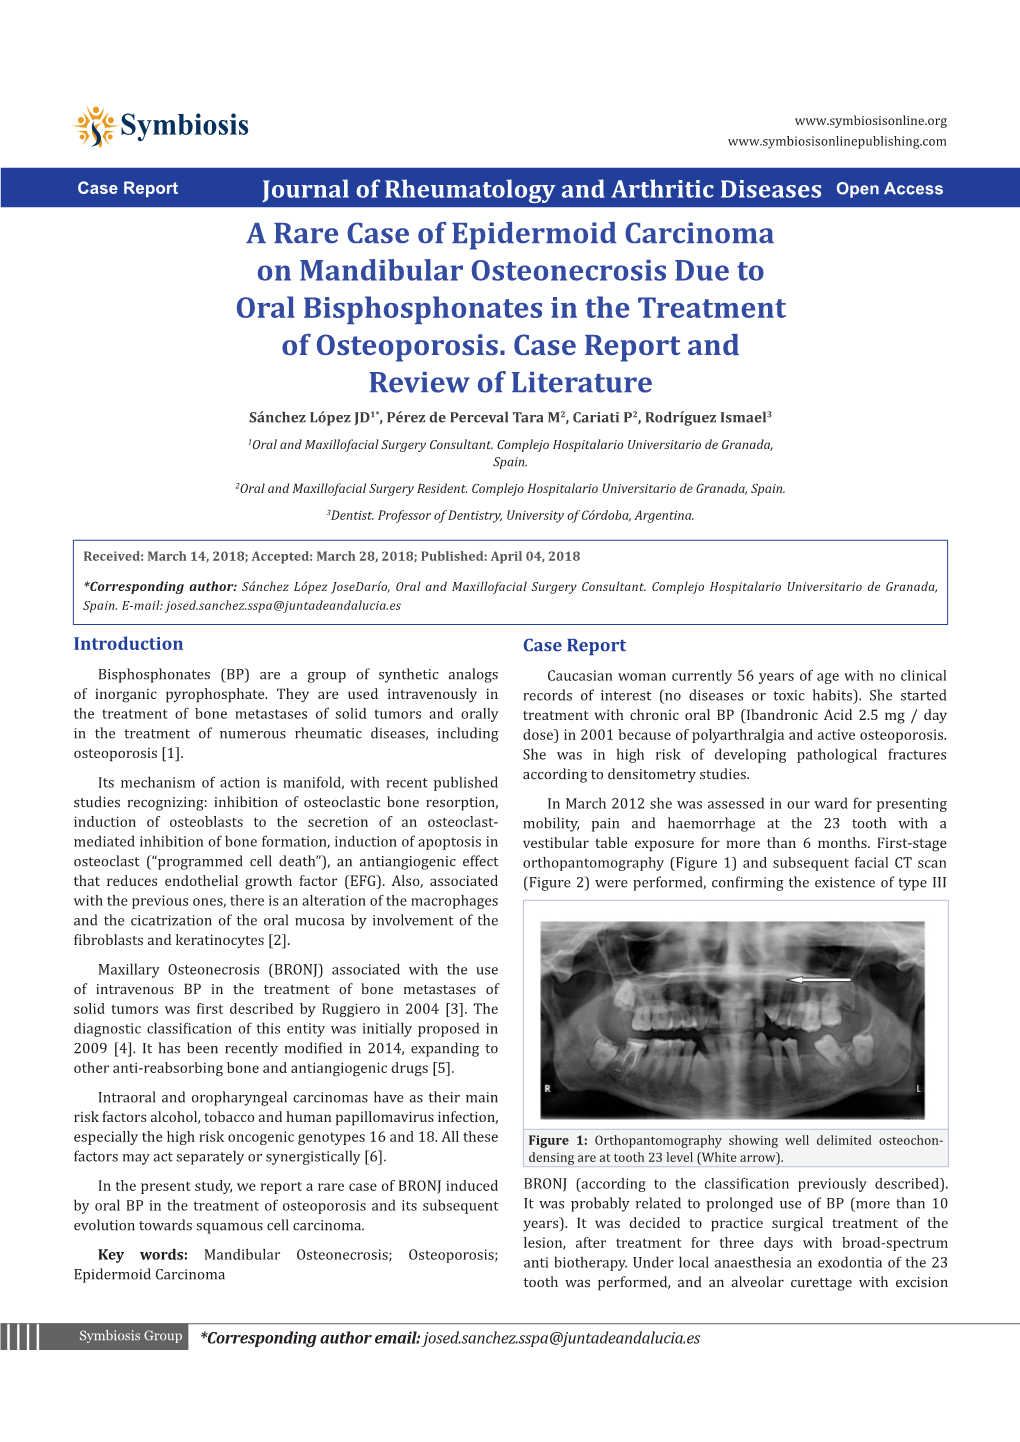 A Rare Case of Epidermoid Carcinoma on Mandibular Osteonecrosis Due to Oral Bisphosphonates in the Treatment of Osteoporosis. Ca